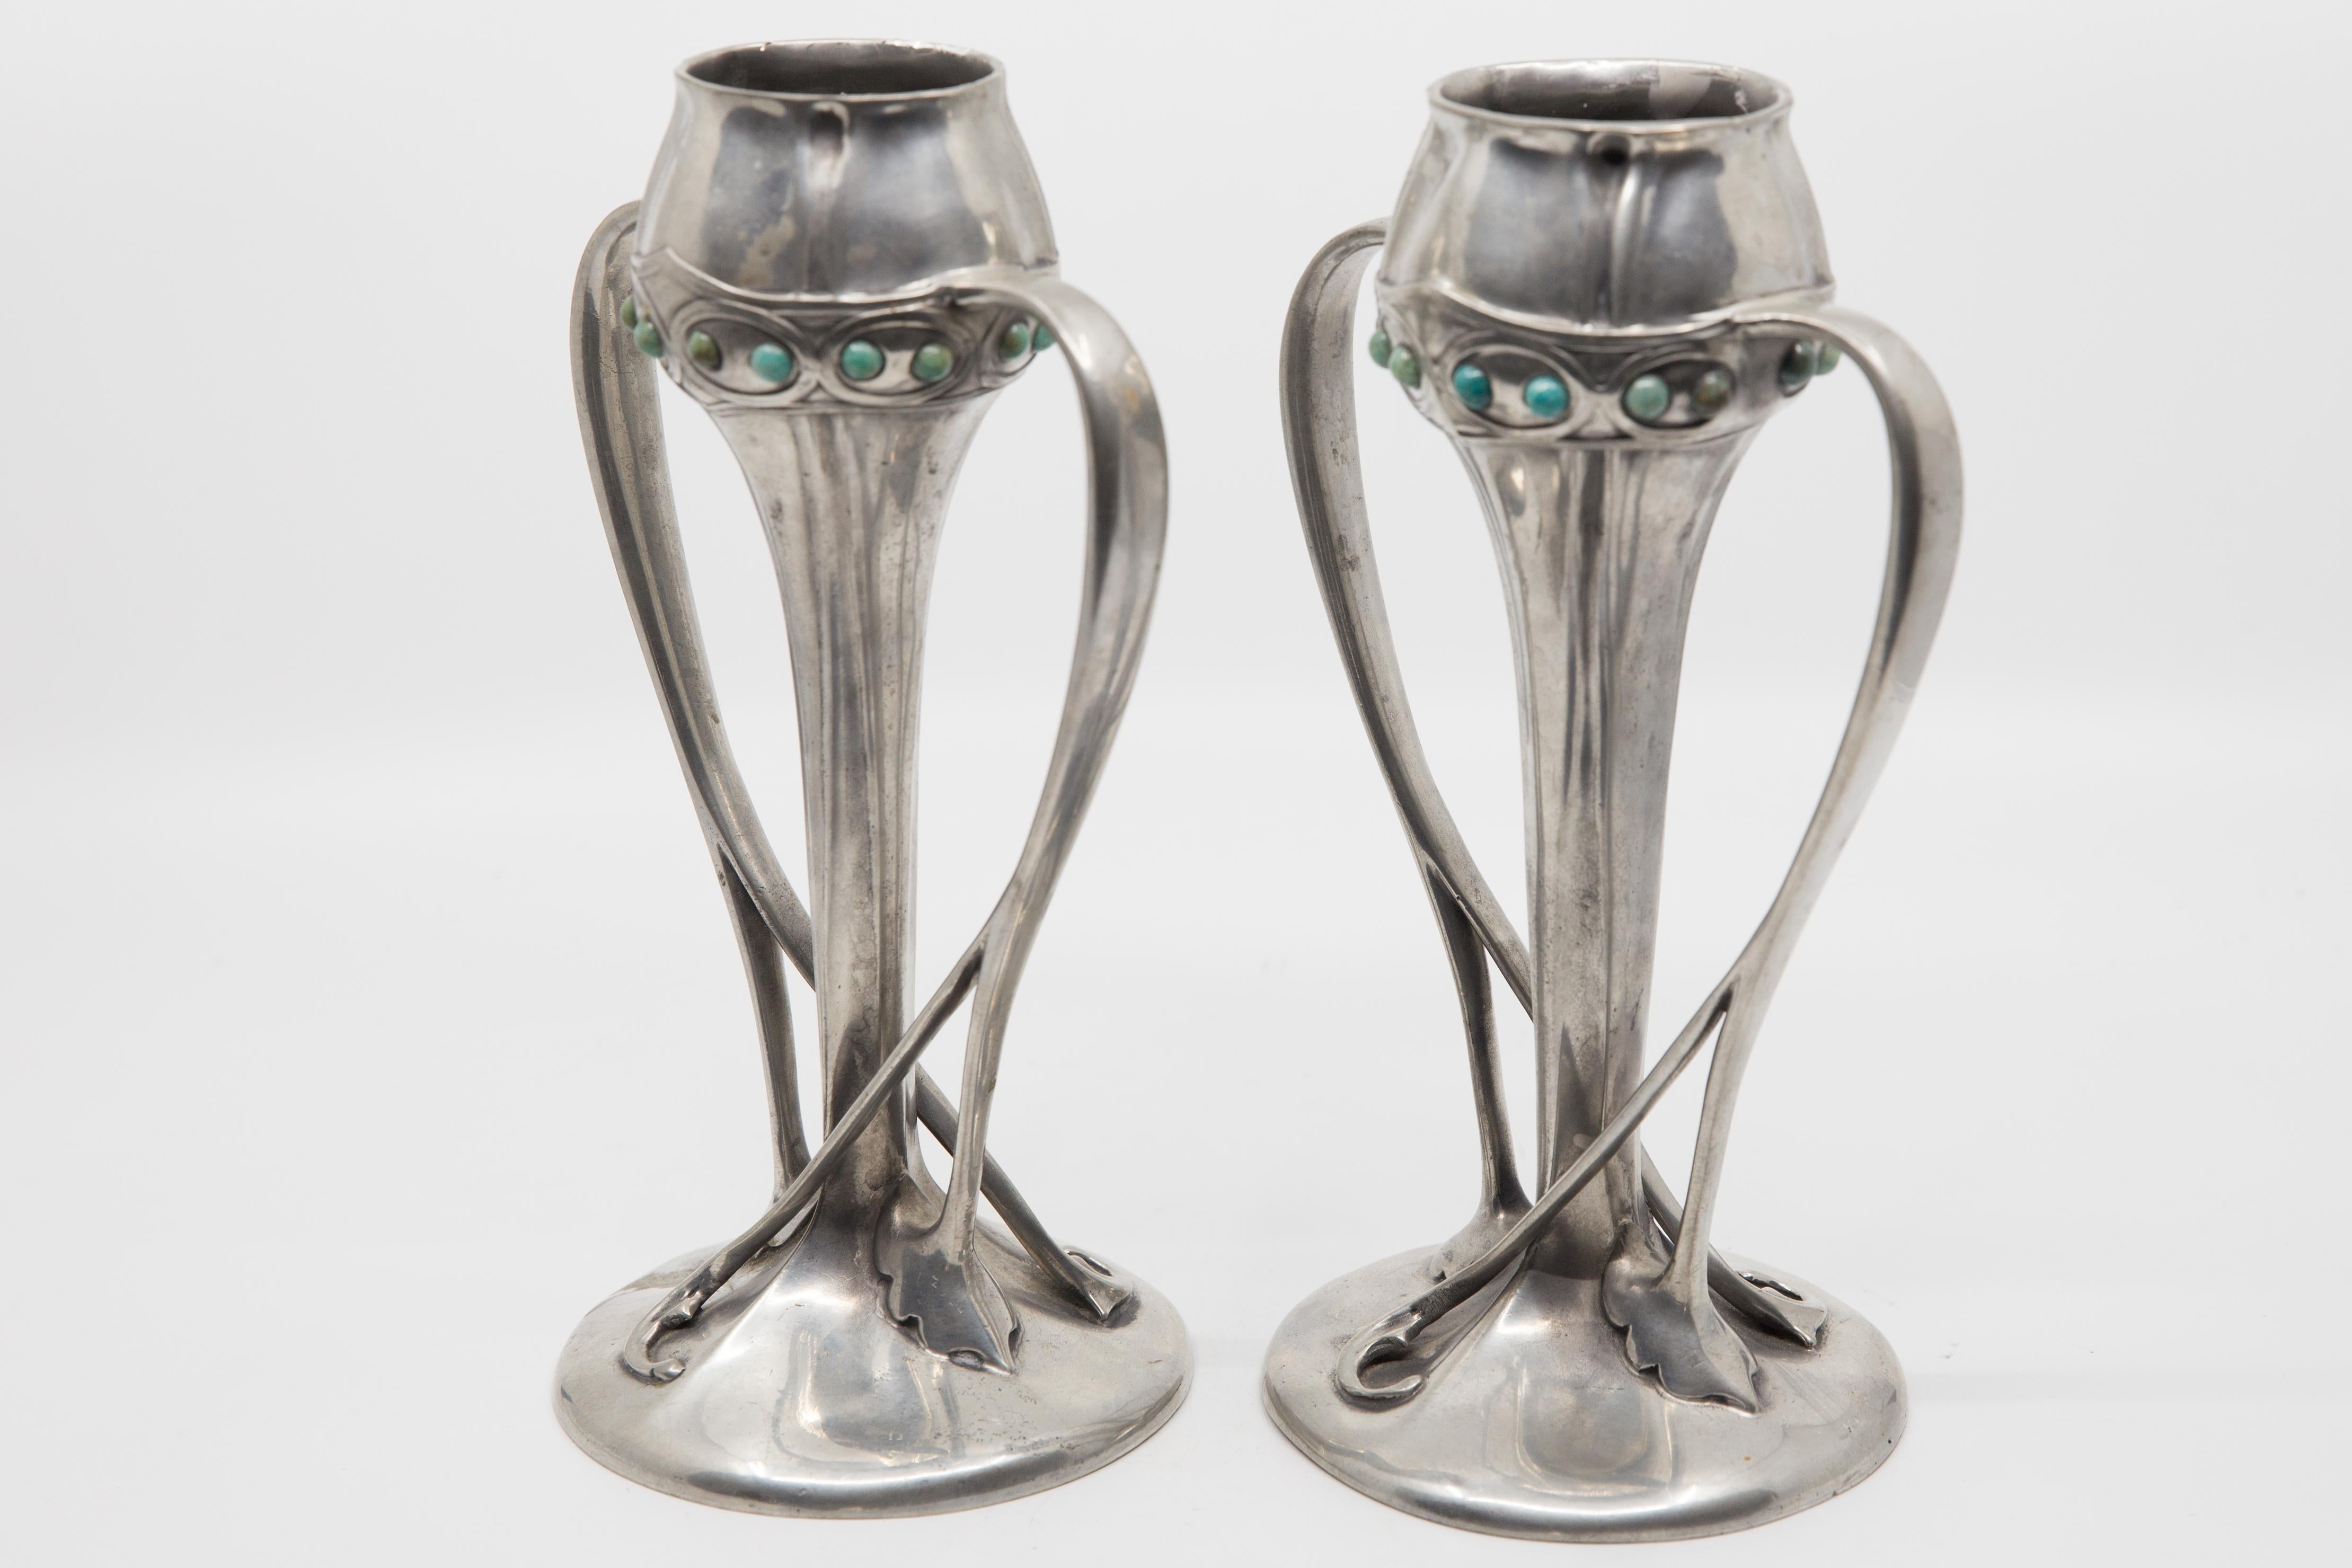 Offered is a pair of Tudric Liberty of London, Archibald Knox Art Nouveau pewter vases with turquoise enameled cabochon jewels created circa 1920. Tudric is a brand name for pewterware made by W.H. Haseler's of Birmingham for Liberty & Co of London,